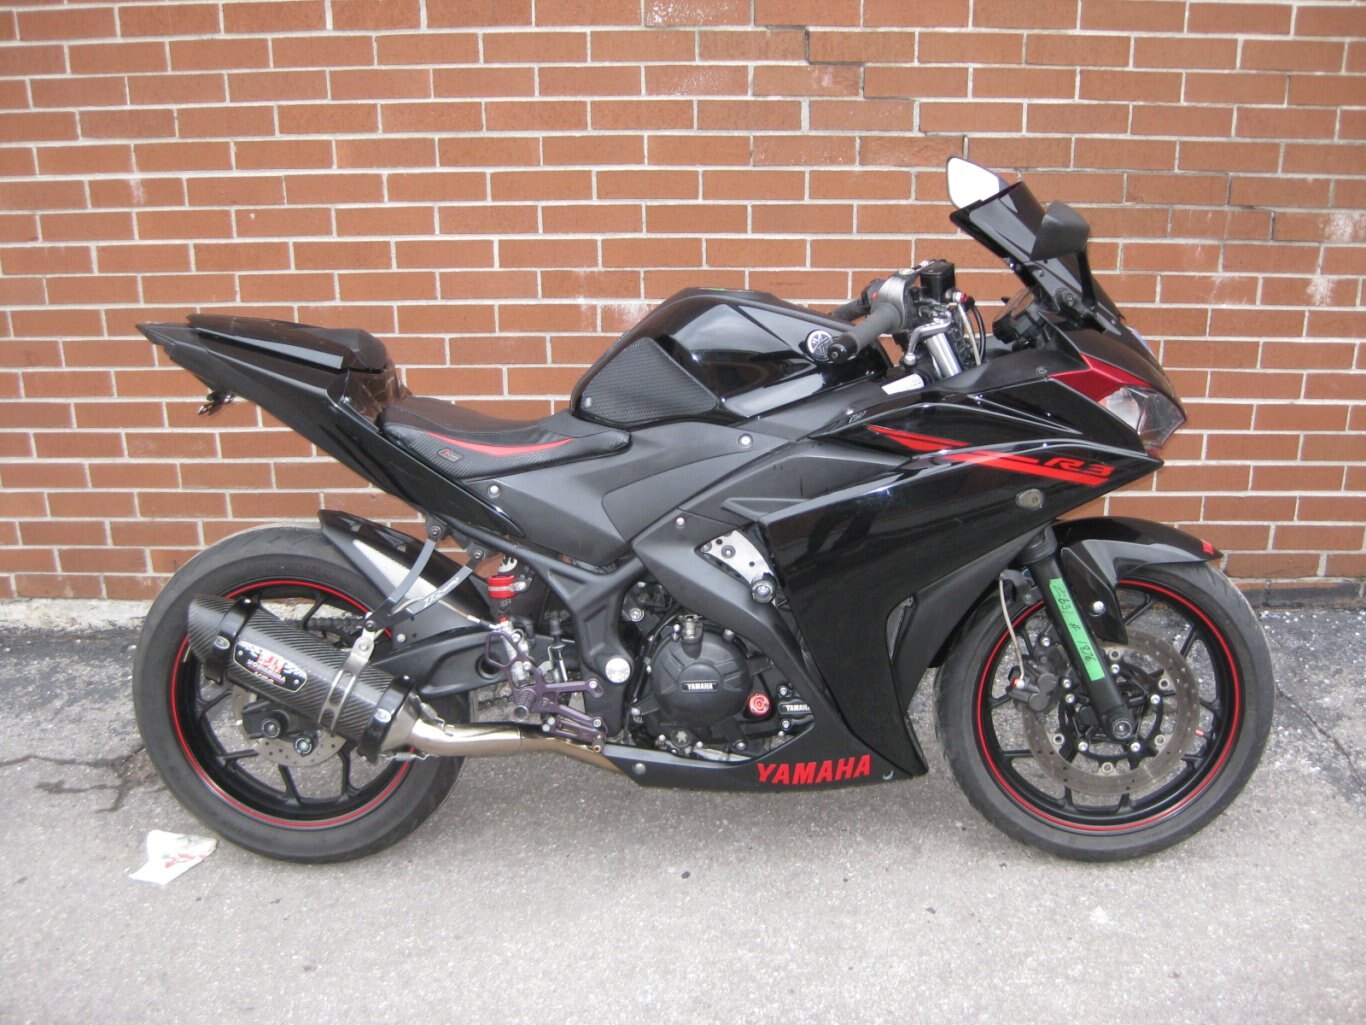 2015 Yamaha YZF-R3 - SOLD & CONGRATS NATHIFA– WELCOME TO THE “COMMUNITY MOTORCYCLING” ON THIS NICELY ACCESSORIZED “SPORTS STYLE YAMAHA R3 – MAY THE FORCE BE WITH YOU - WITH THANKS FROM GARY & “TEAM CYCLE WORLD”